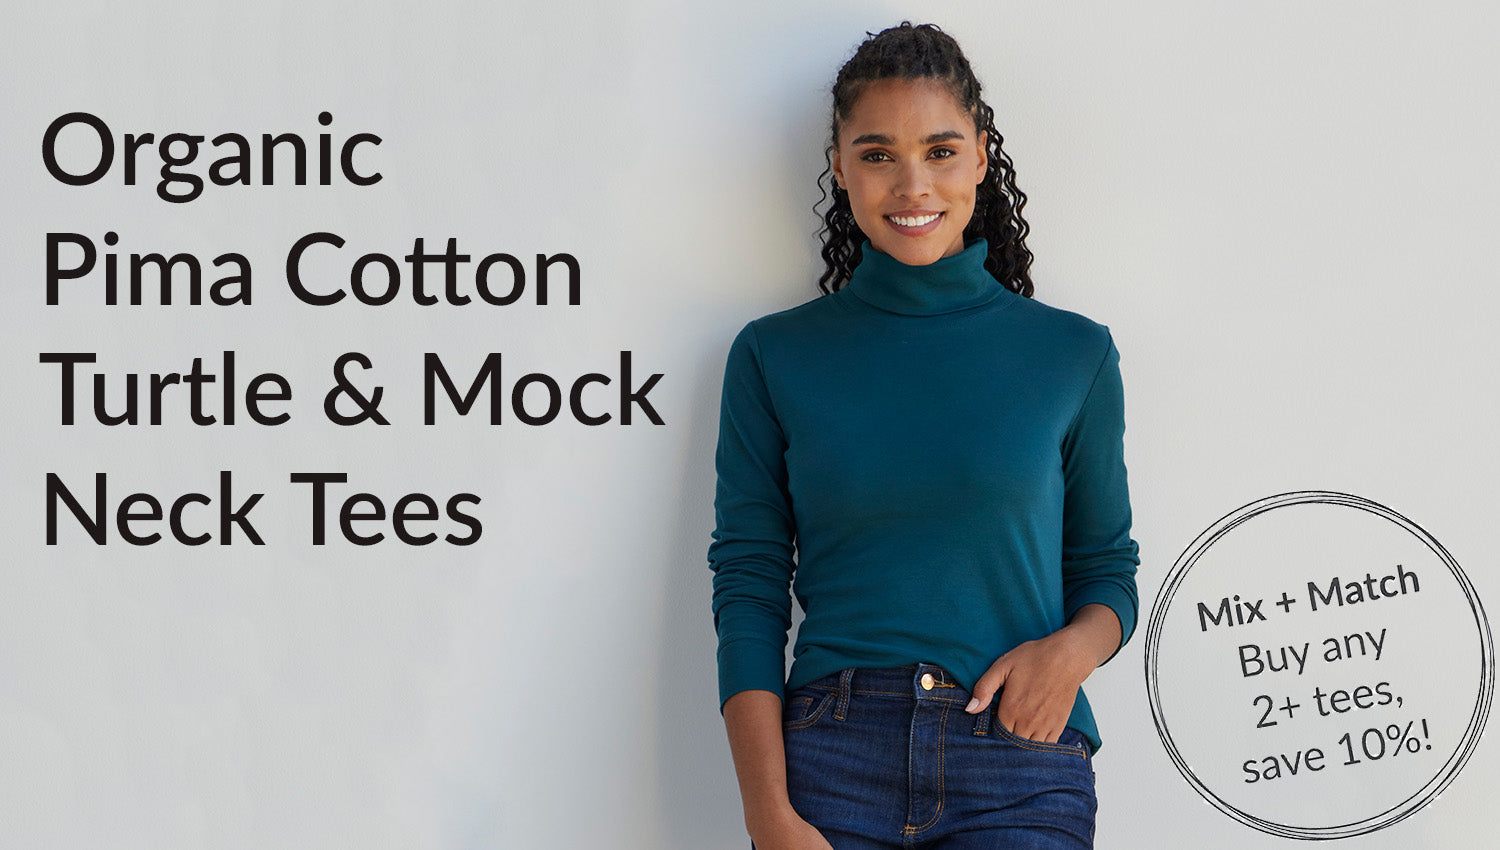 womens organic cotton turtlenecks and mock turtleneck tops and tees - fair trade clothing